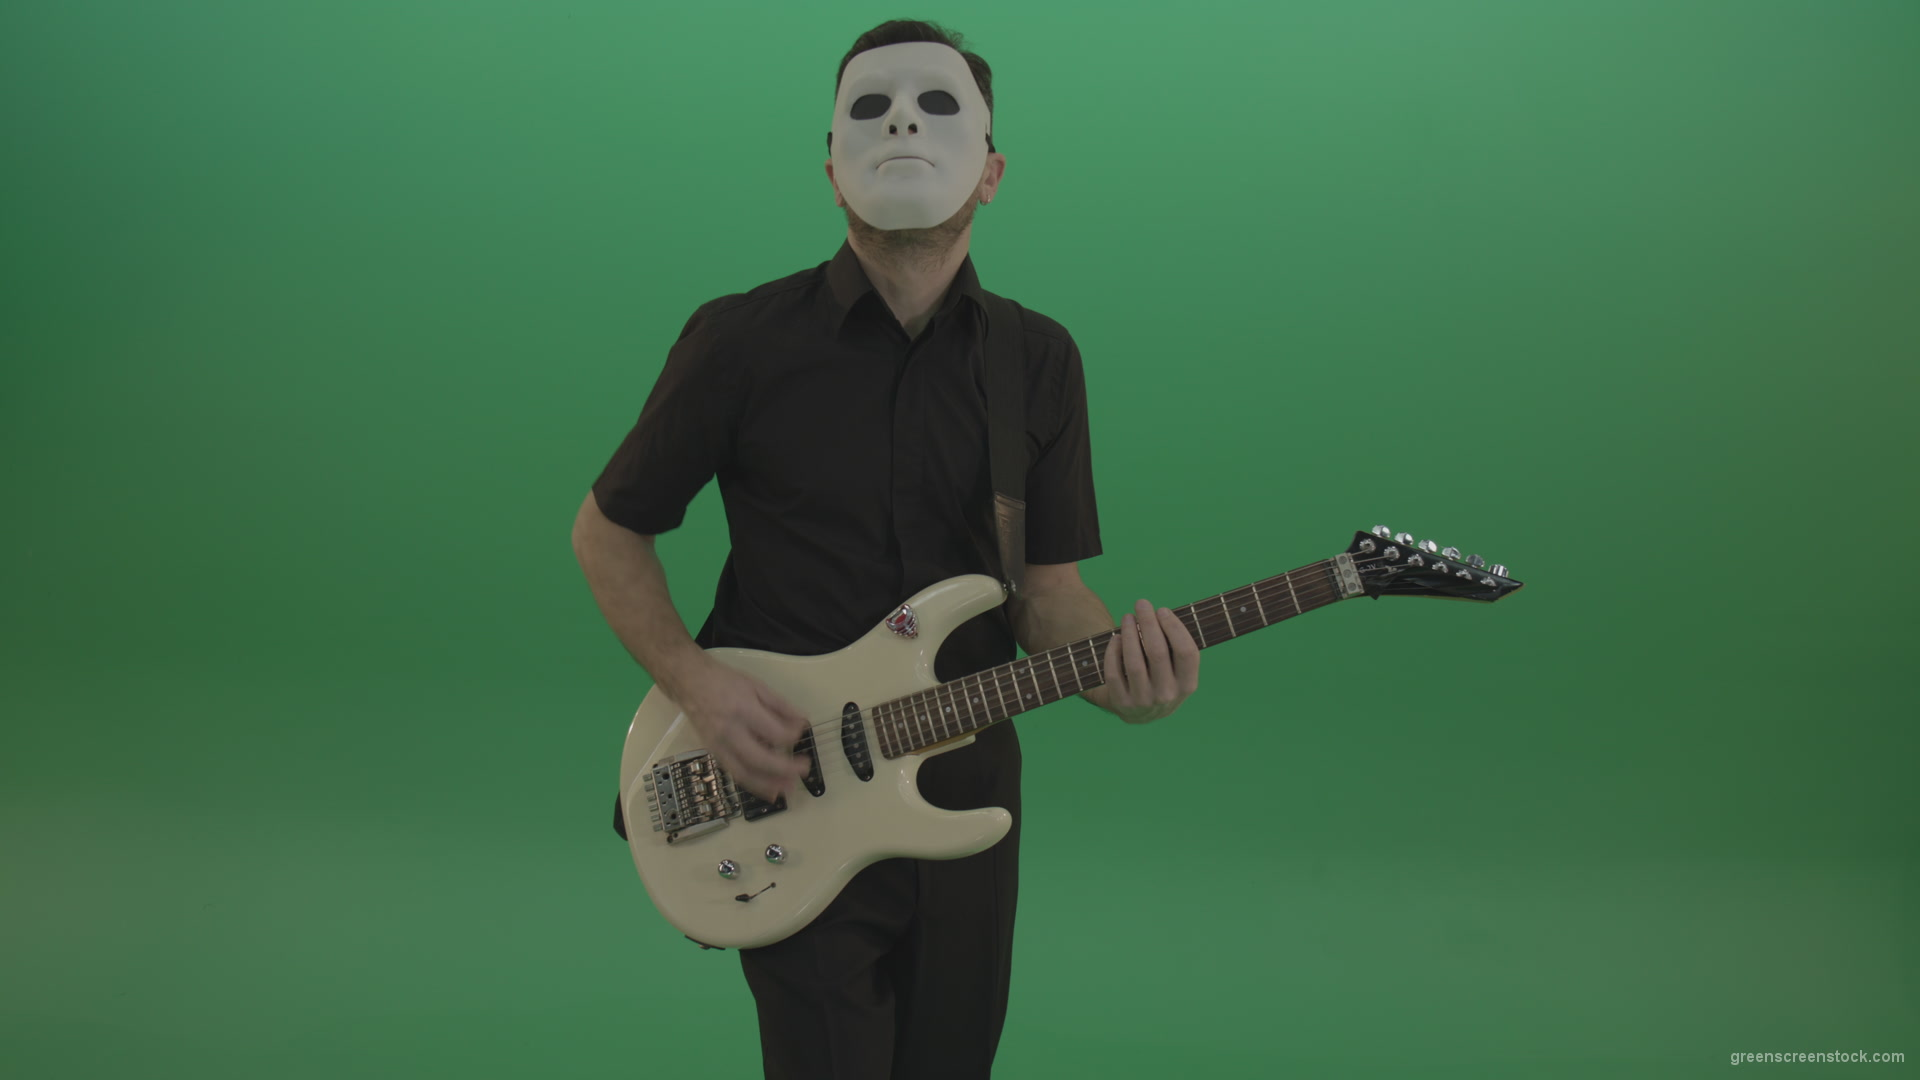 Rock-man-in-white-mask-and-black-wear-playing-guitar-isolated-on-green-screen-in-front-view_005 Green Screen Stock